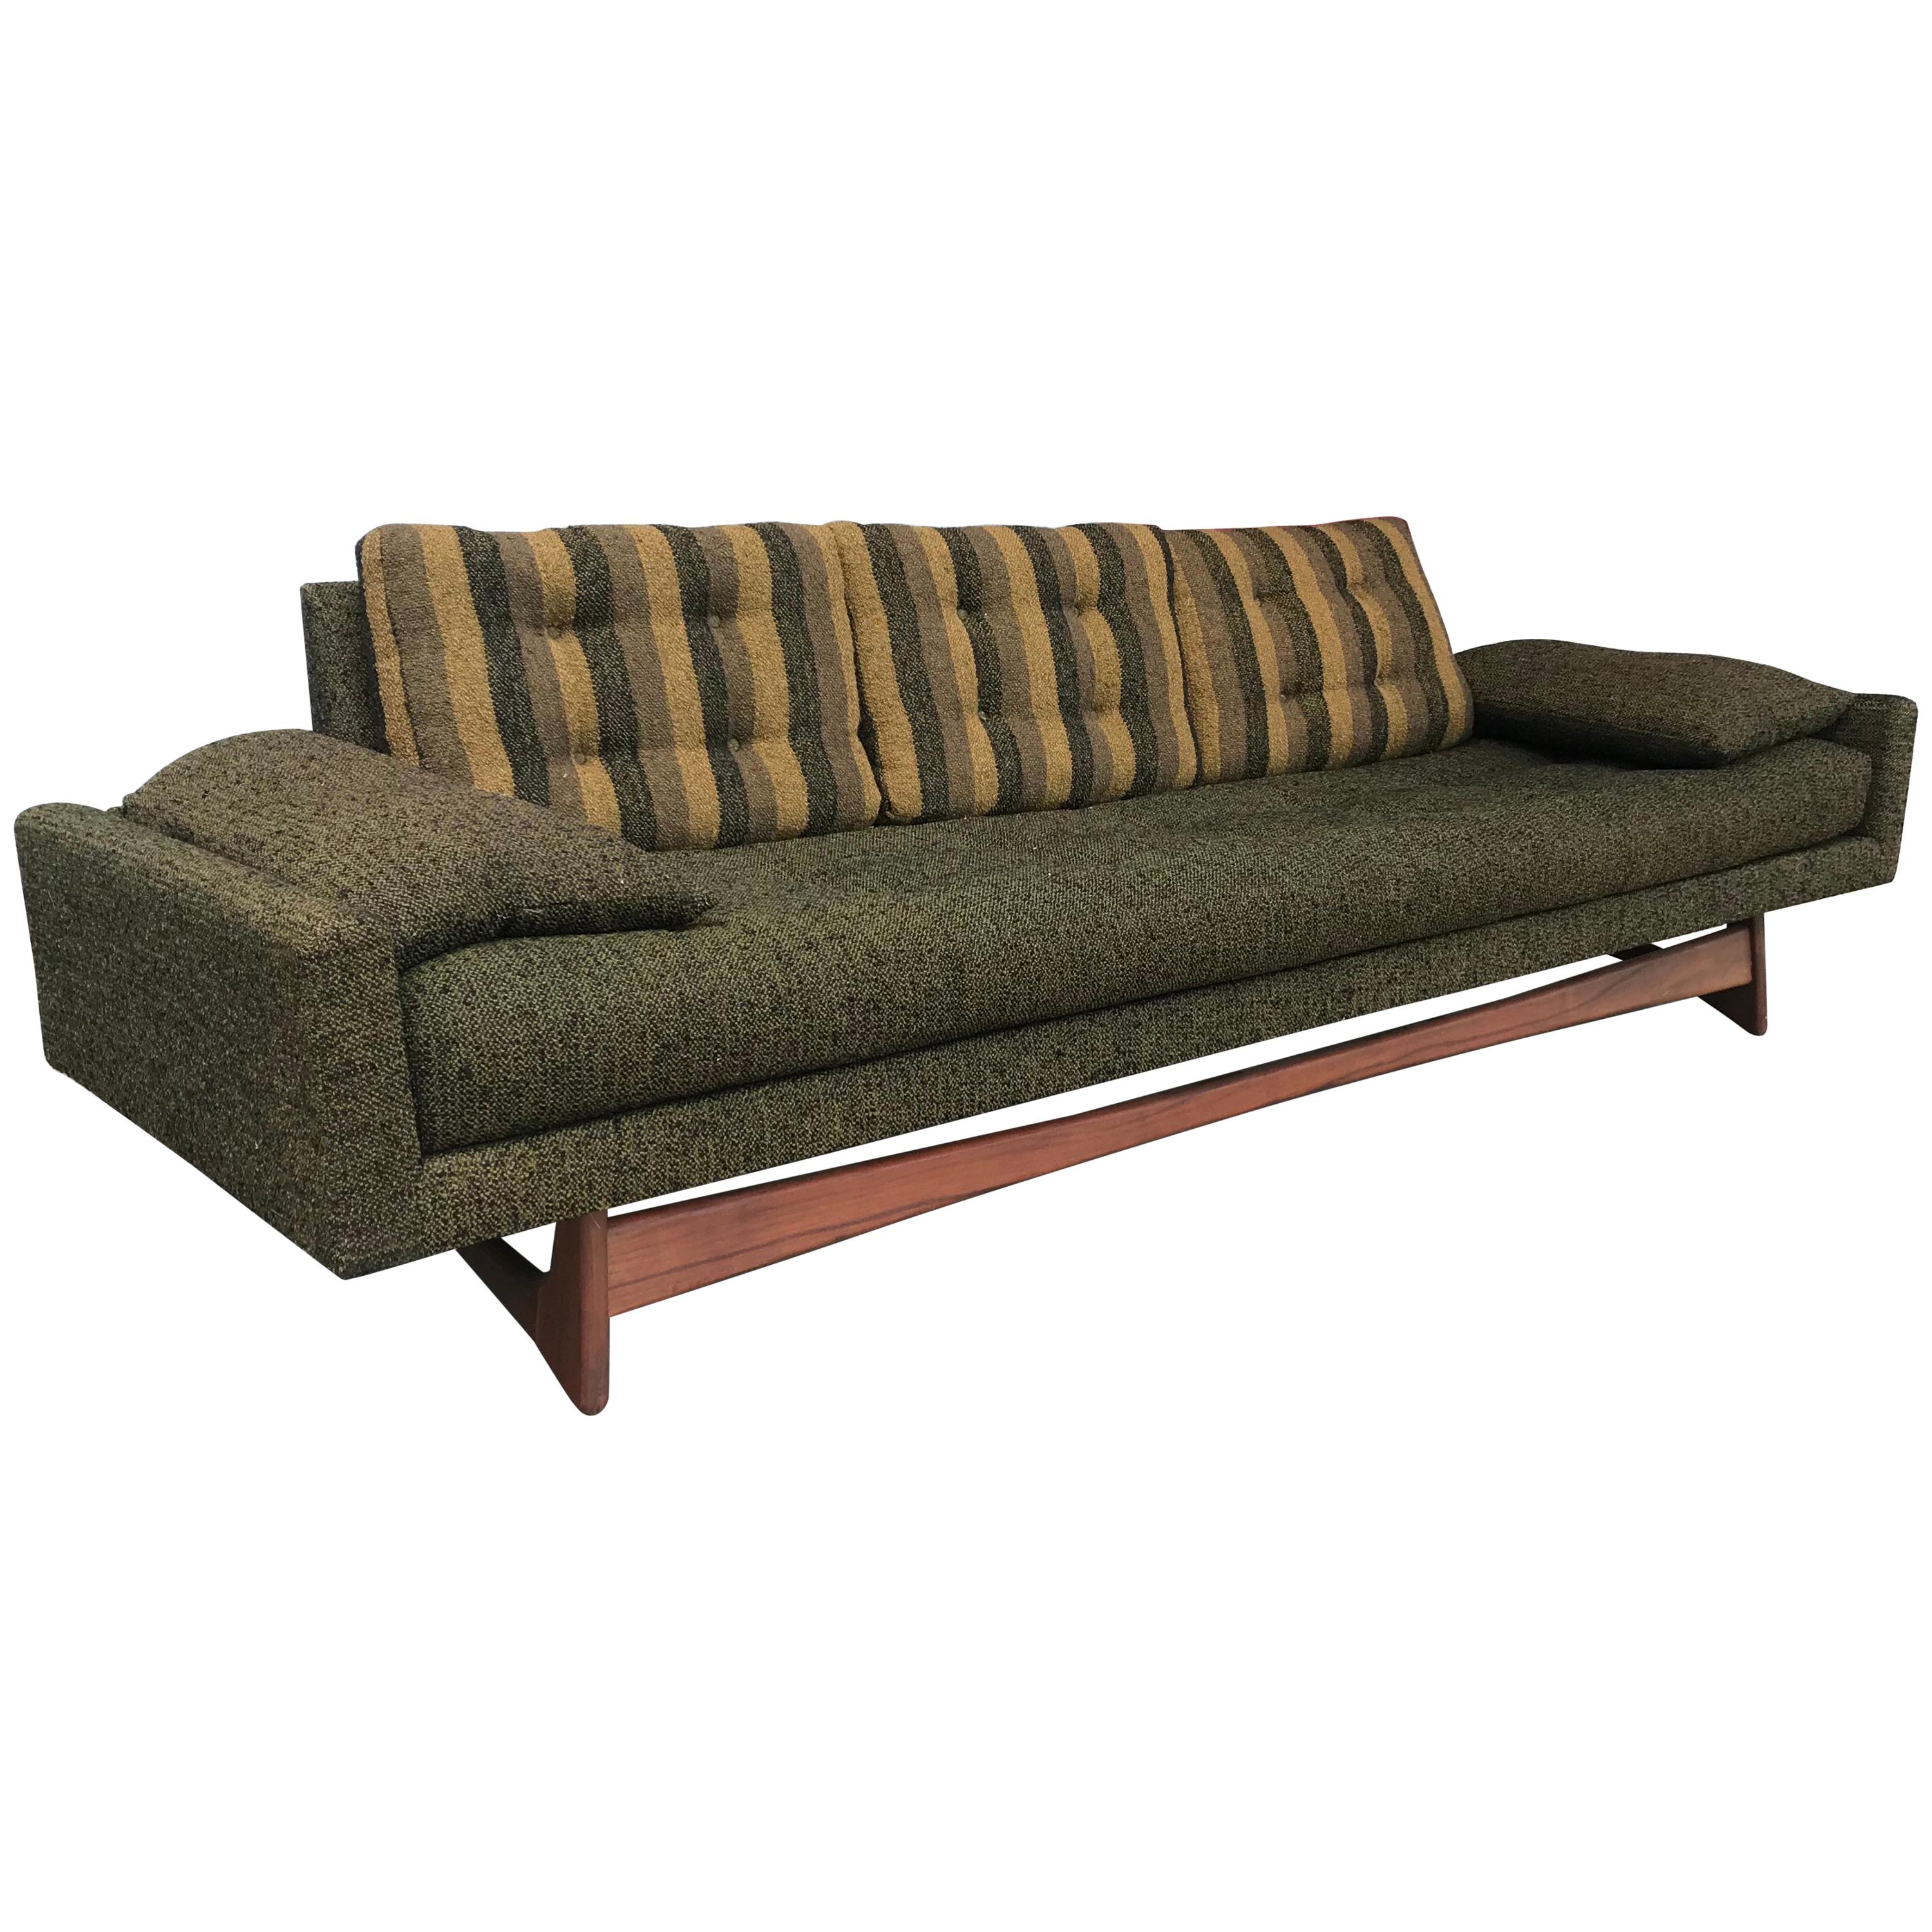 Stunning Modernist Sofa by Adrian Pearsall for Craft Associates